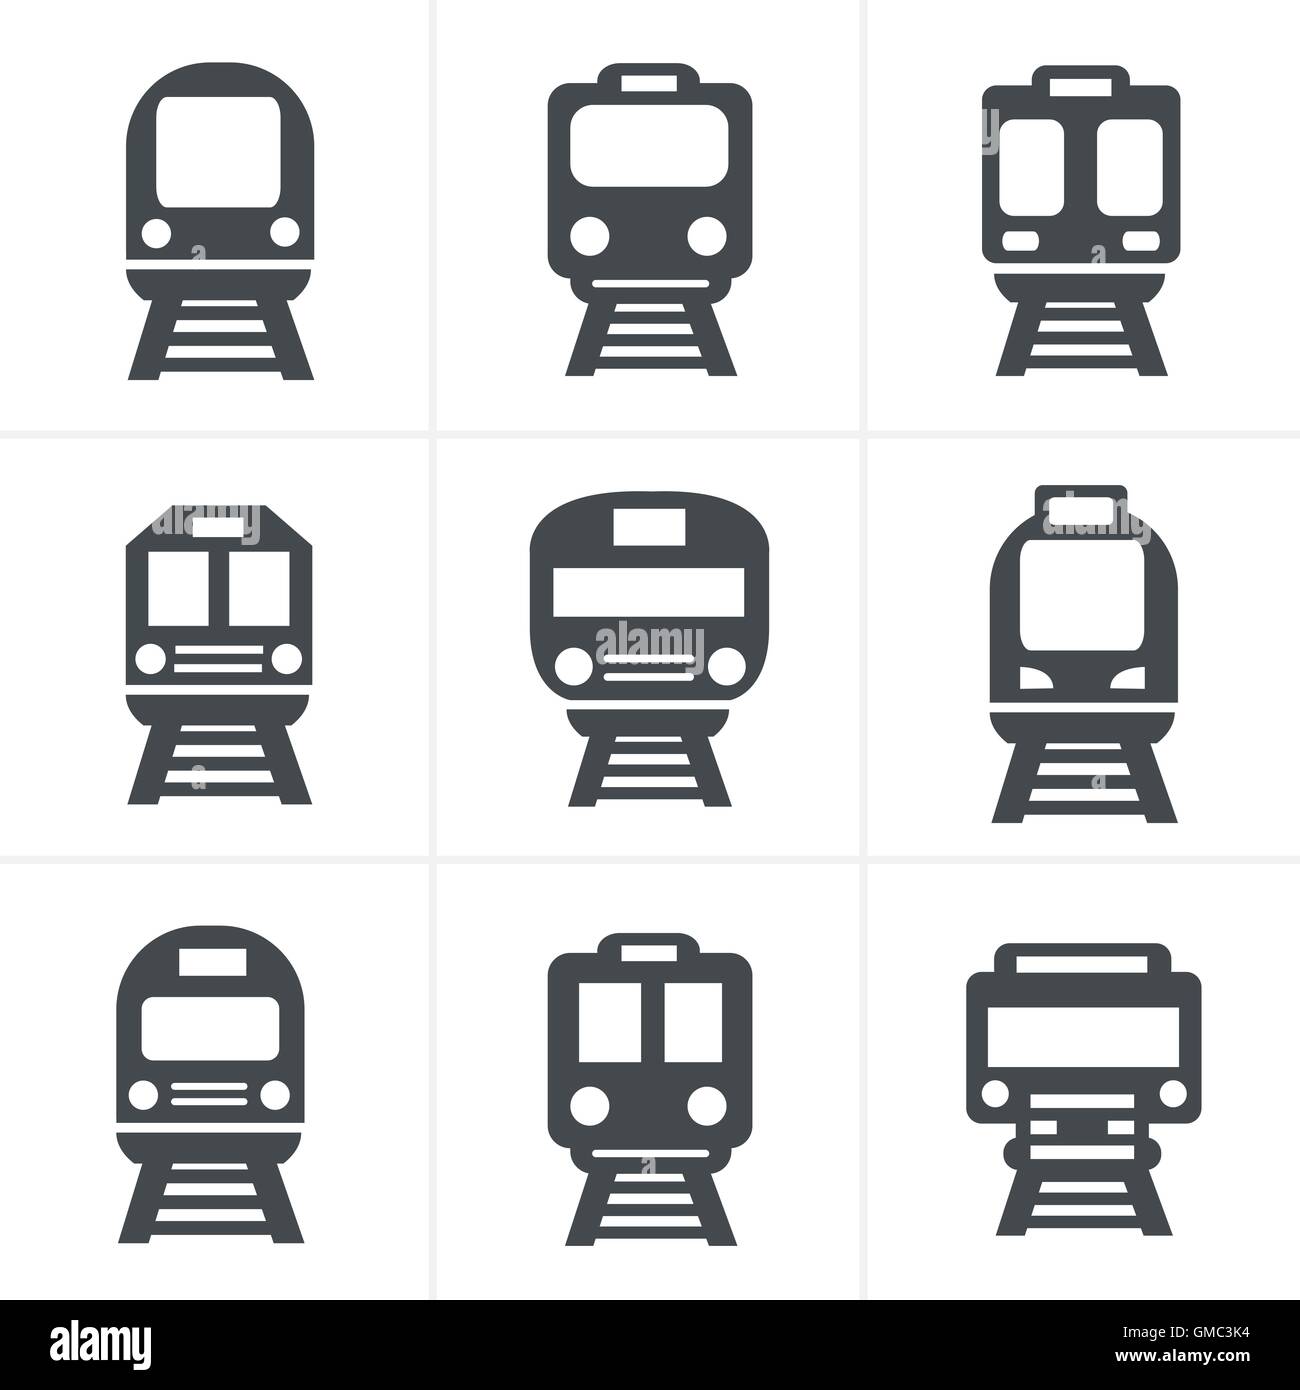 Set of transport icons - Train and Tram, vector illustration Stock Vector